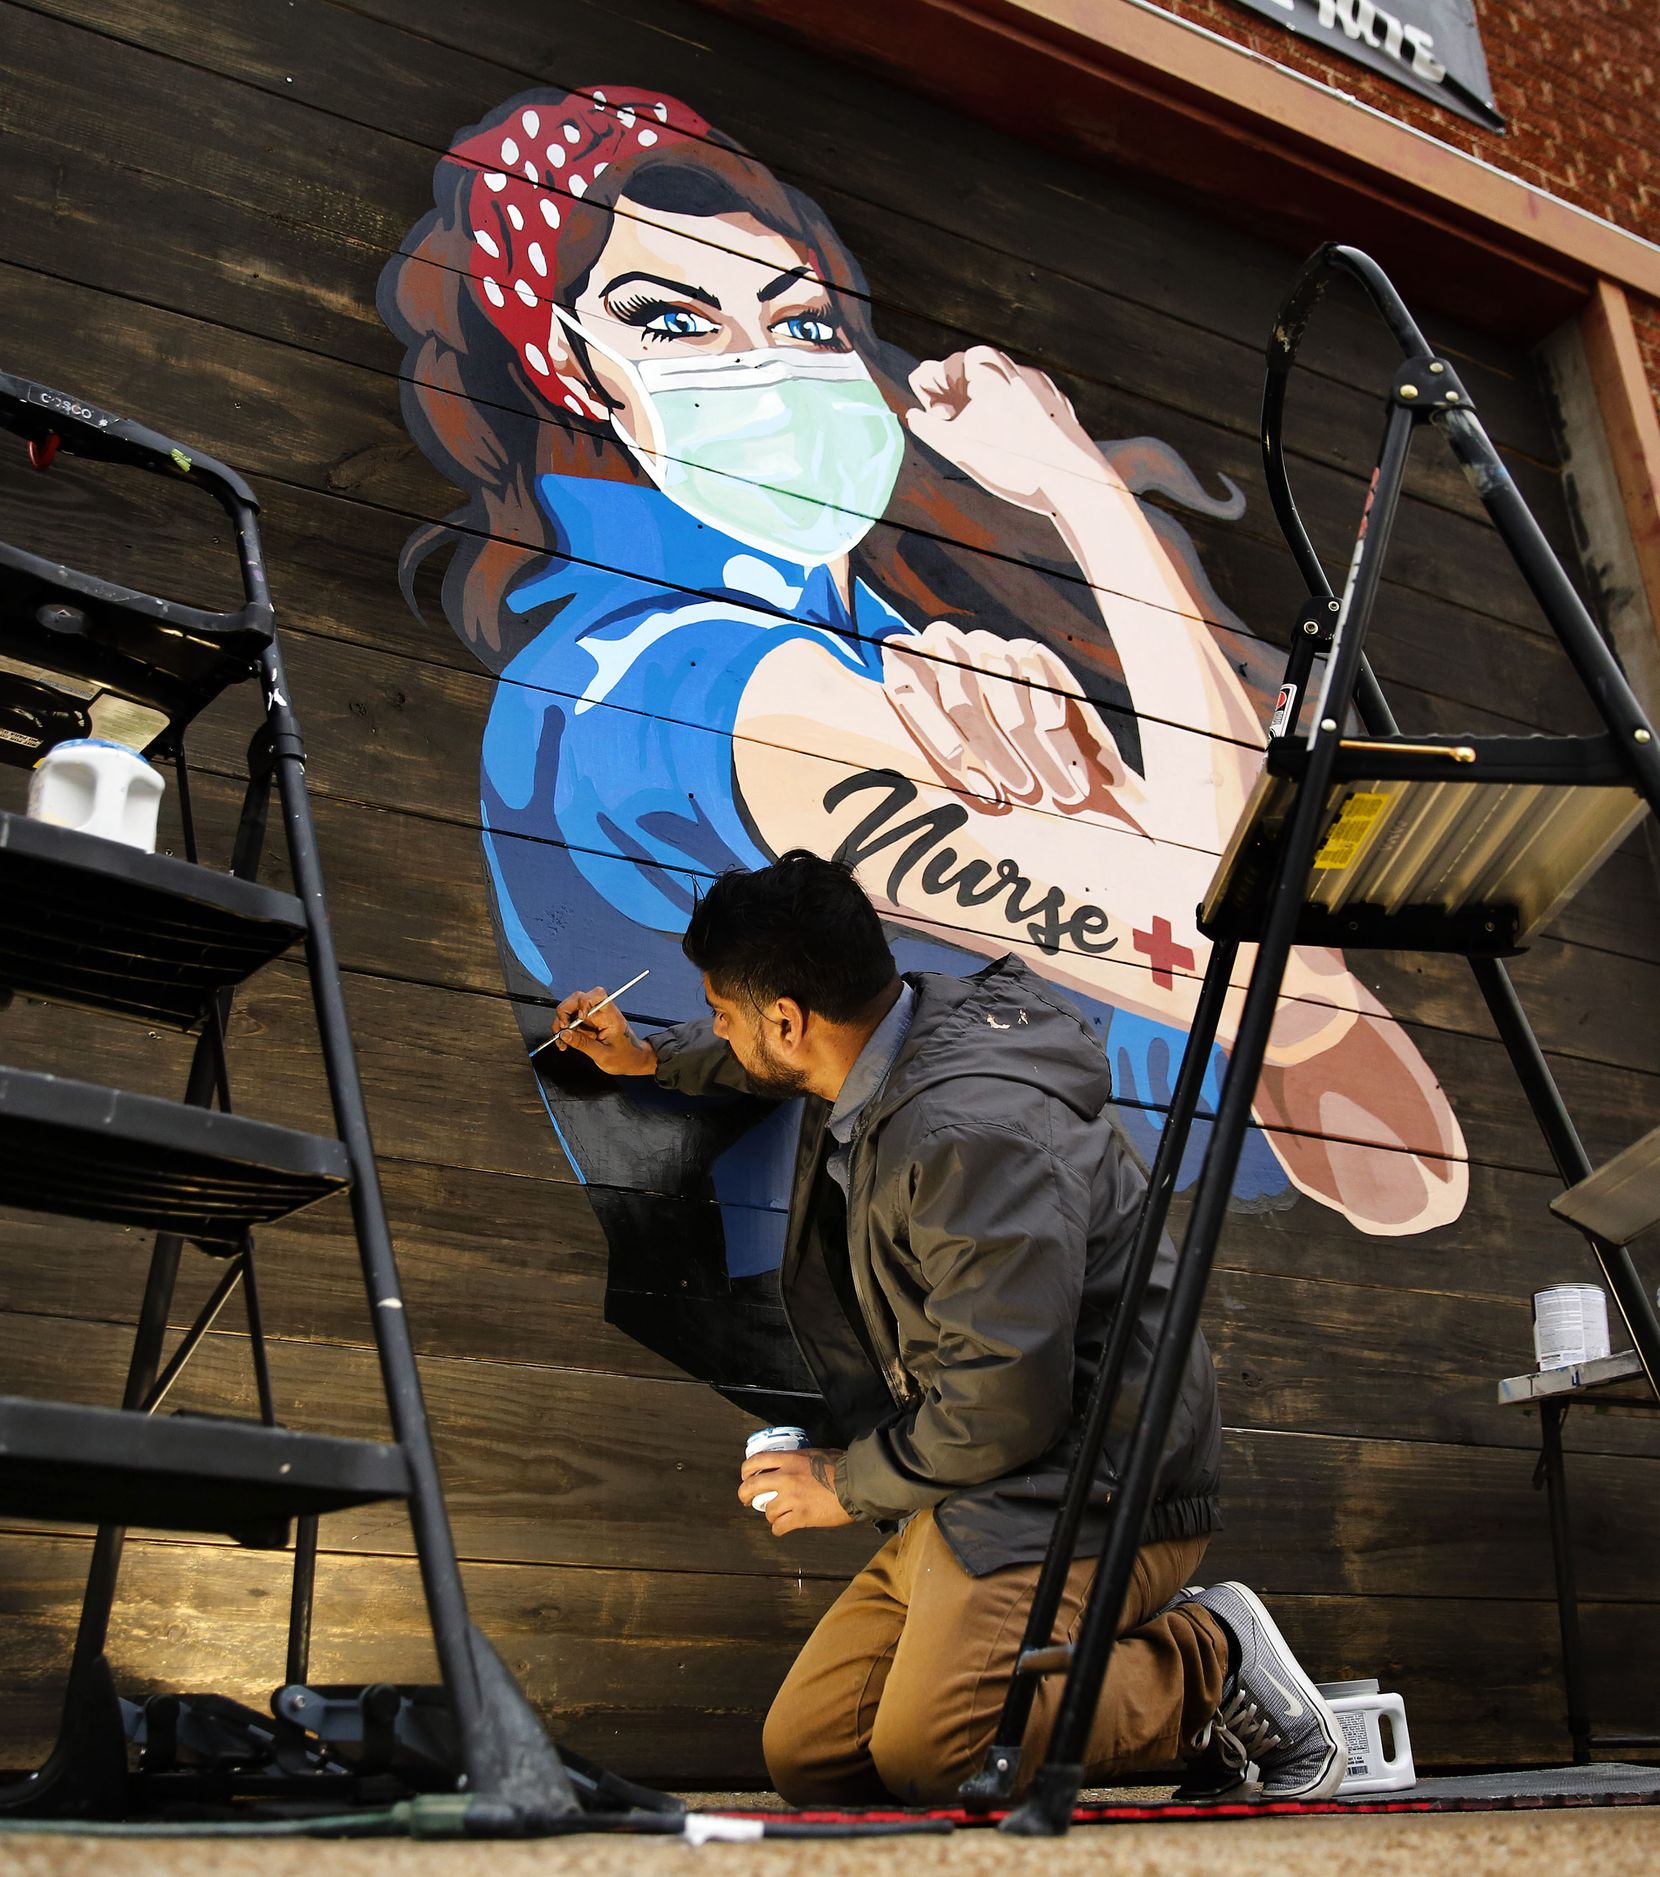 Dallas Artist Miguel Barajas paints a mural of a nurse on the exterior of Redfield's Tavern...